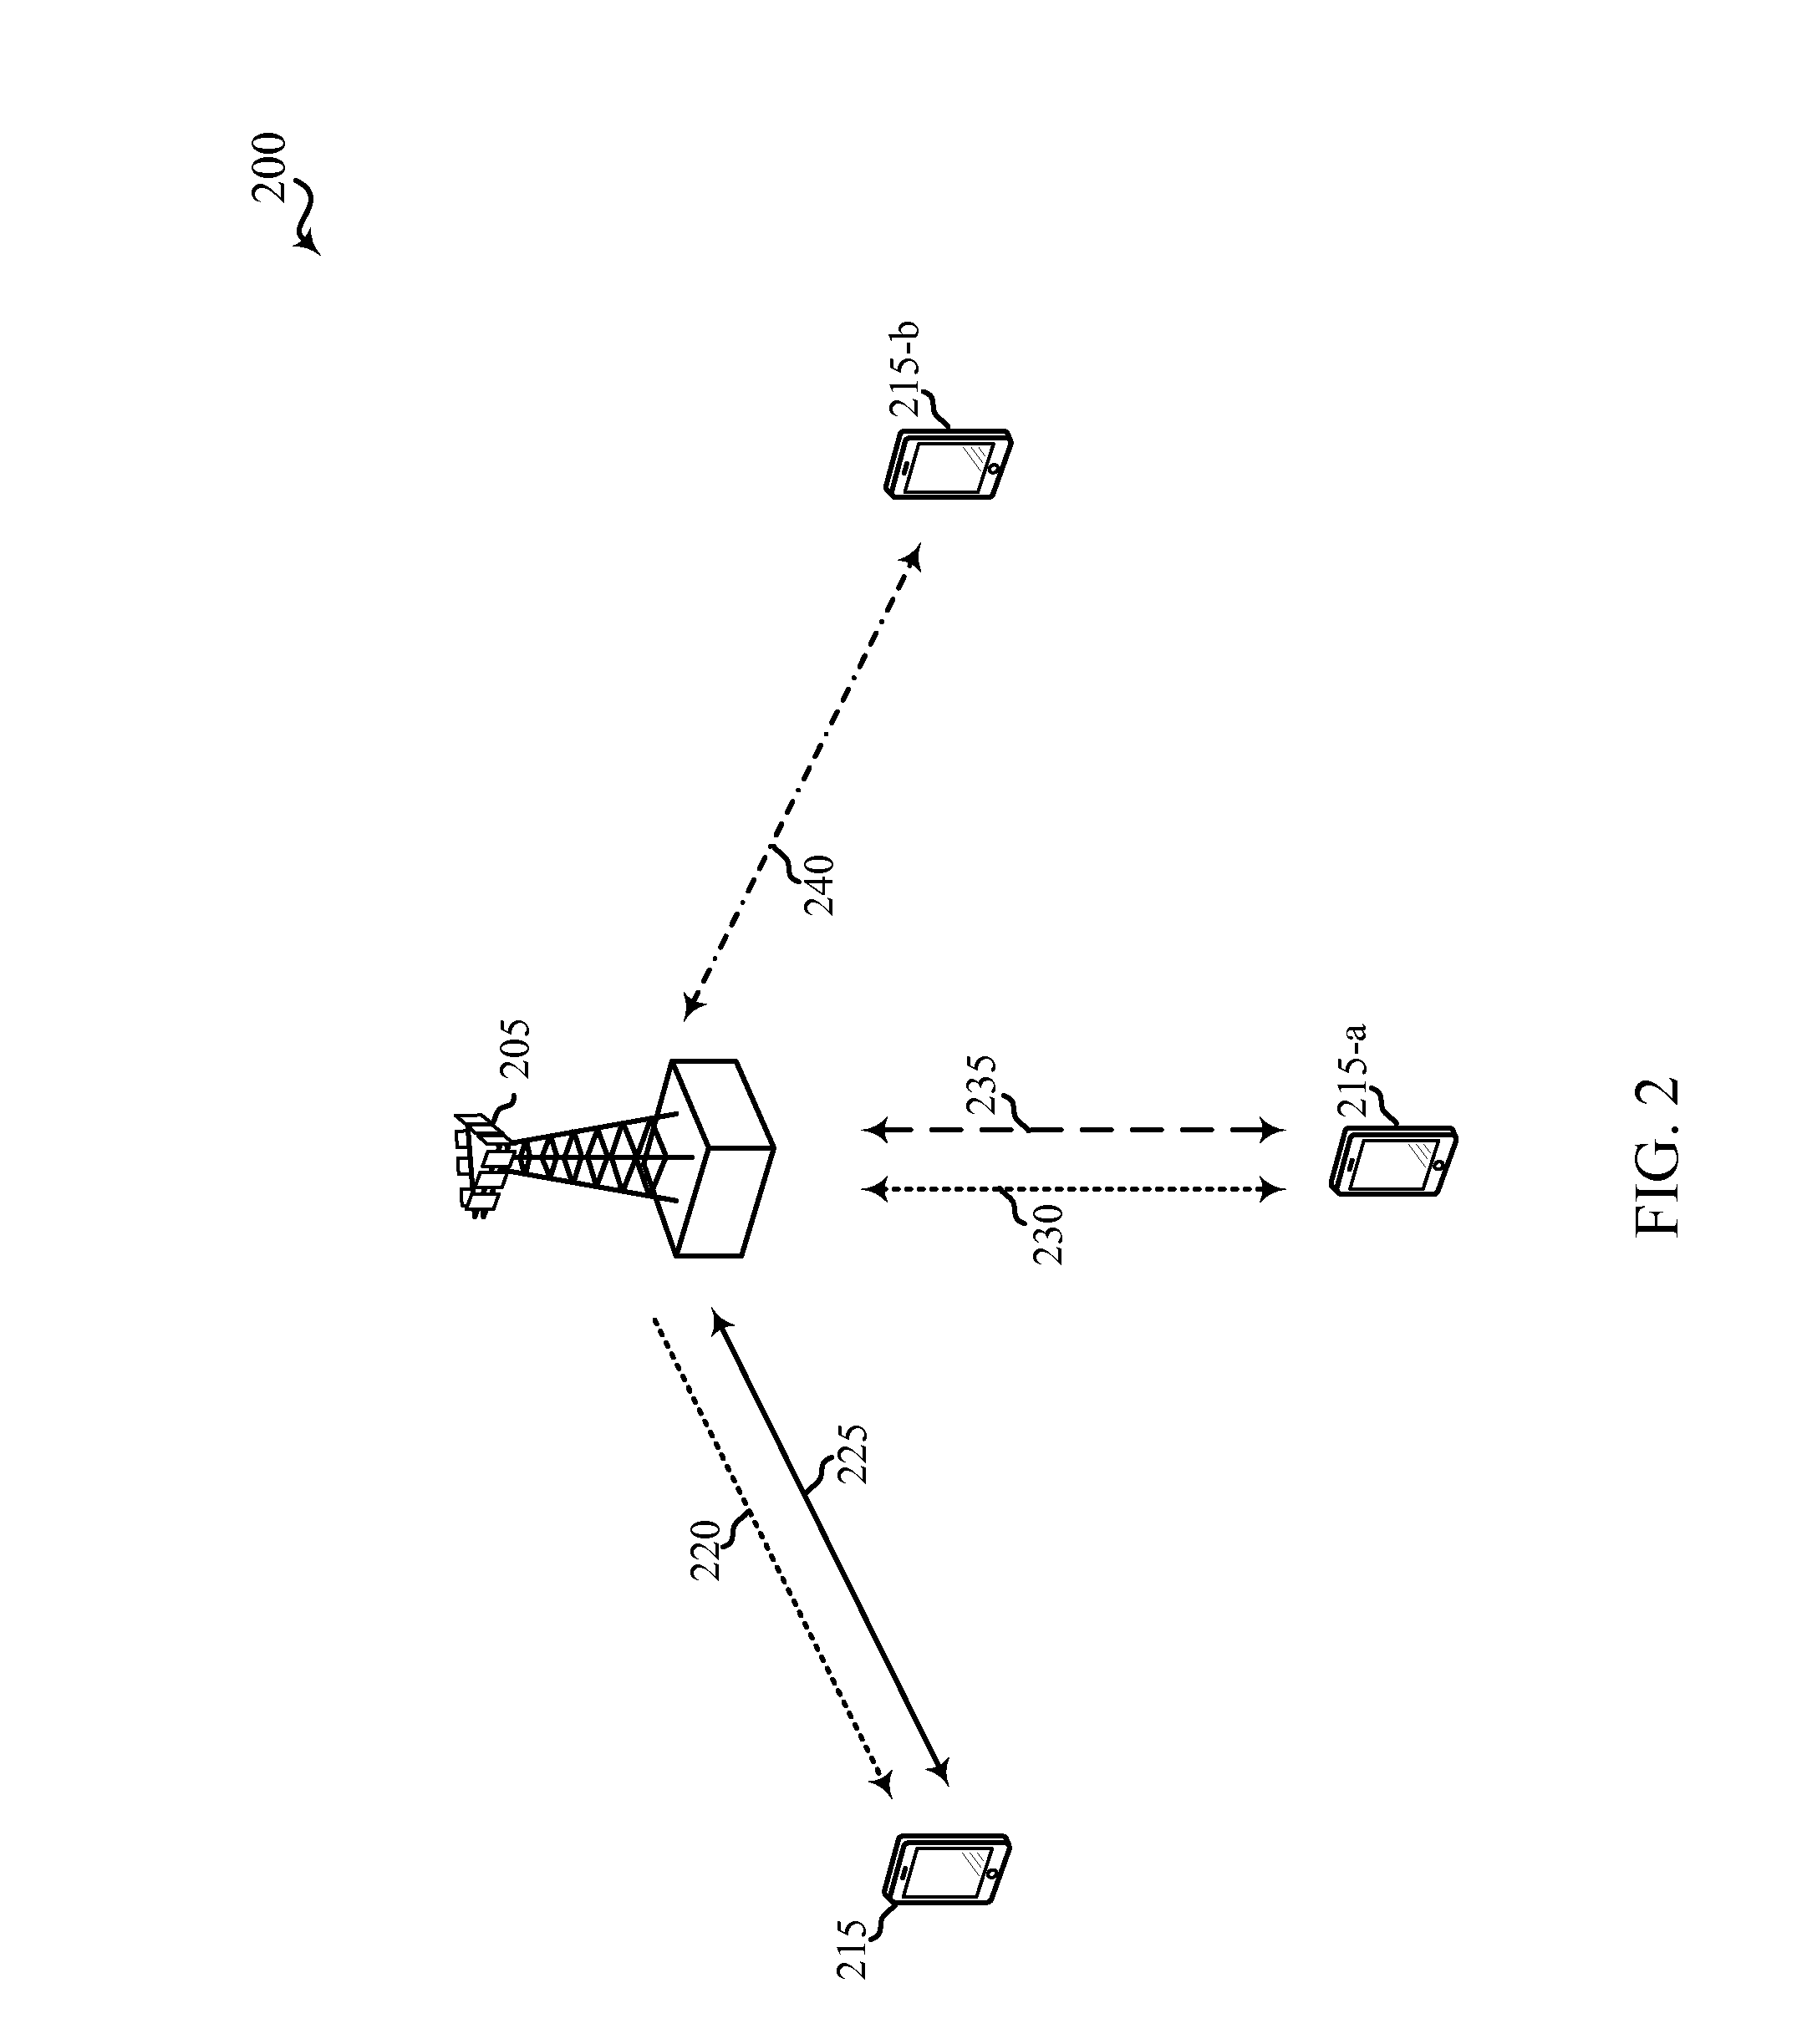 Techniques for channel access in asynchronous unlicensed radio frequency spectrum band deployments